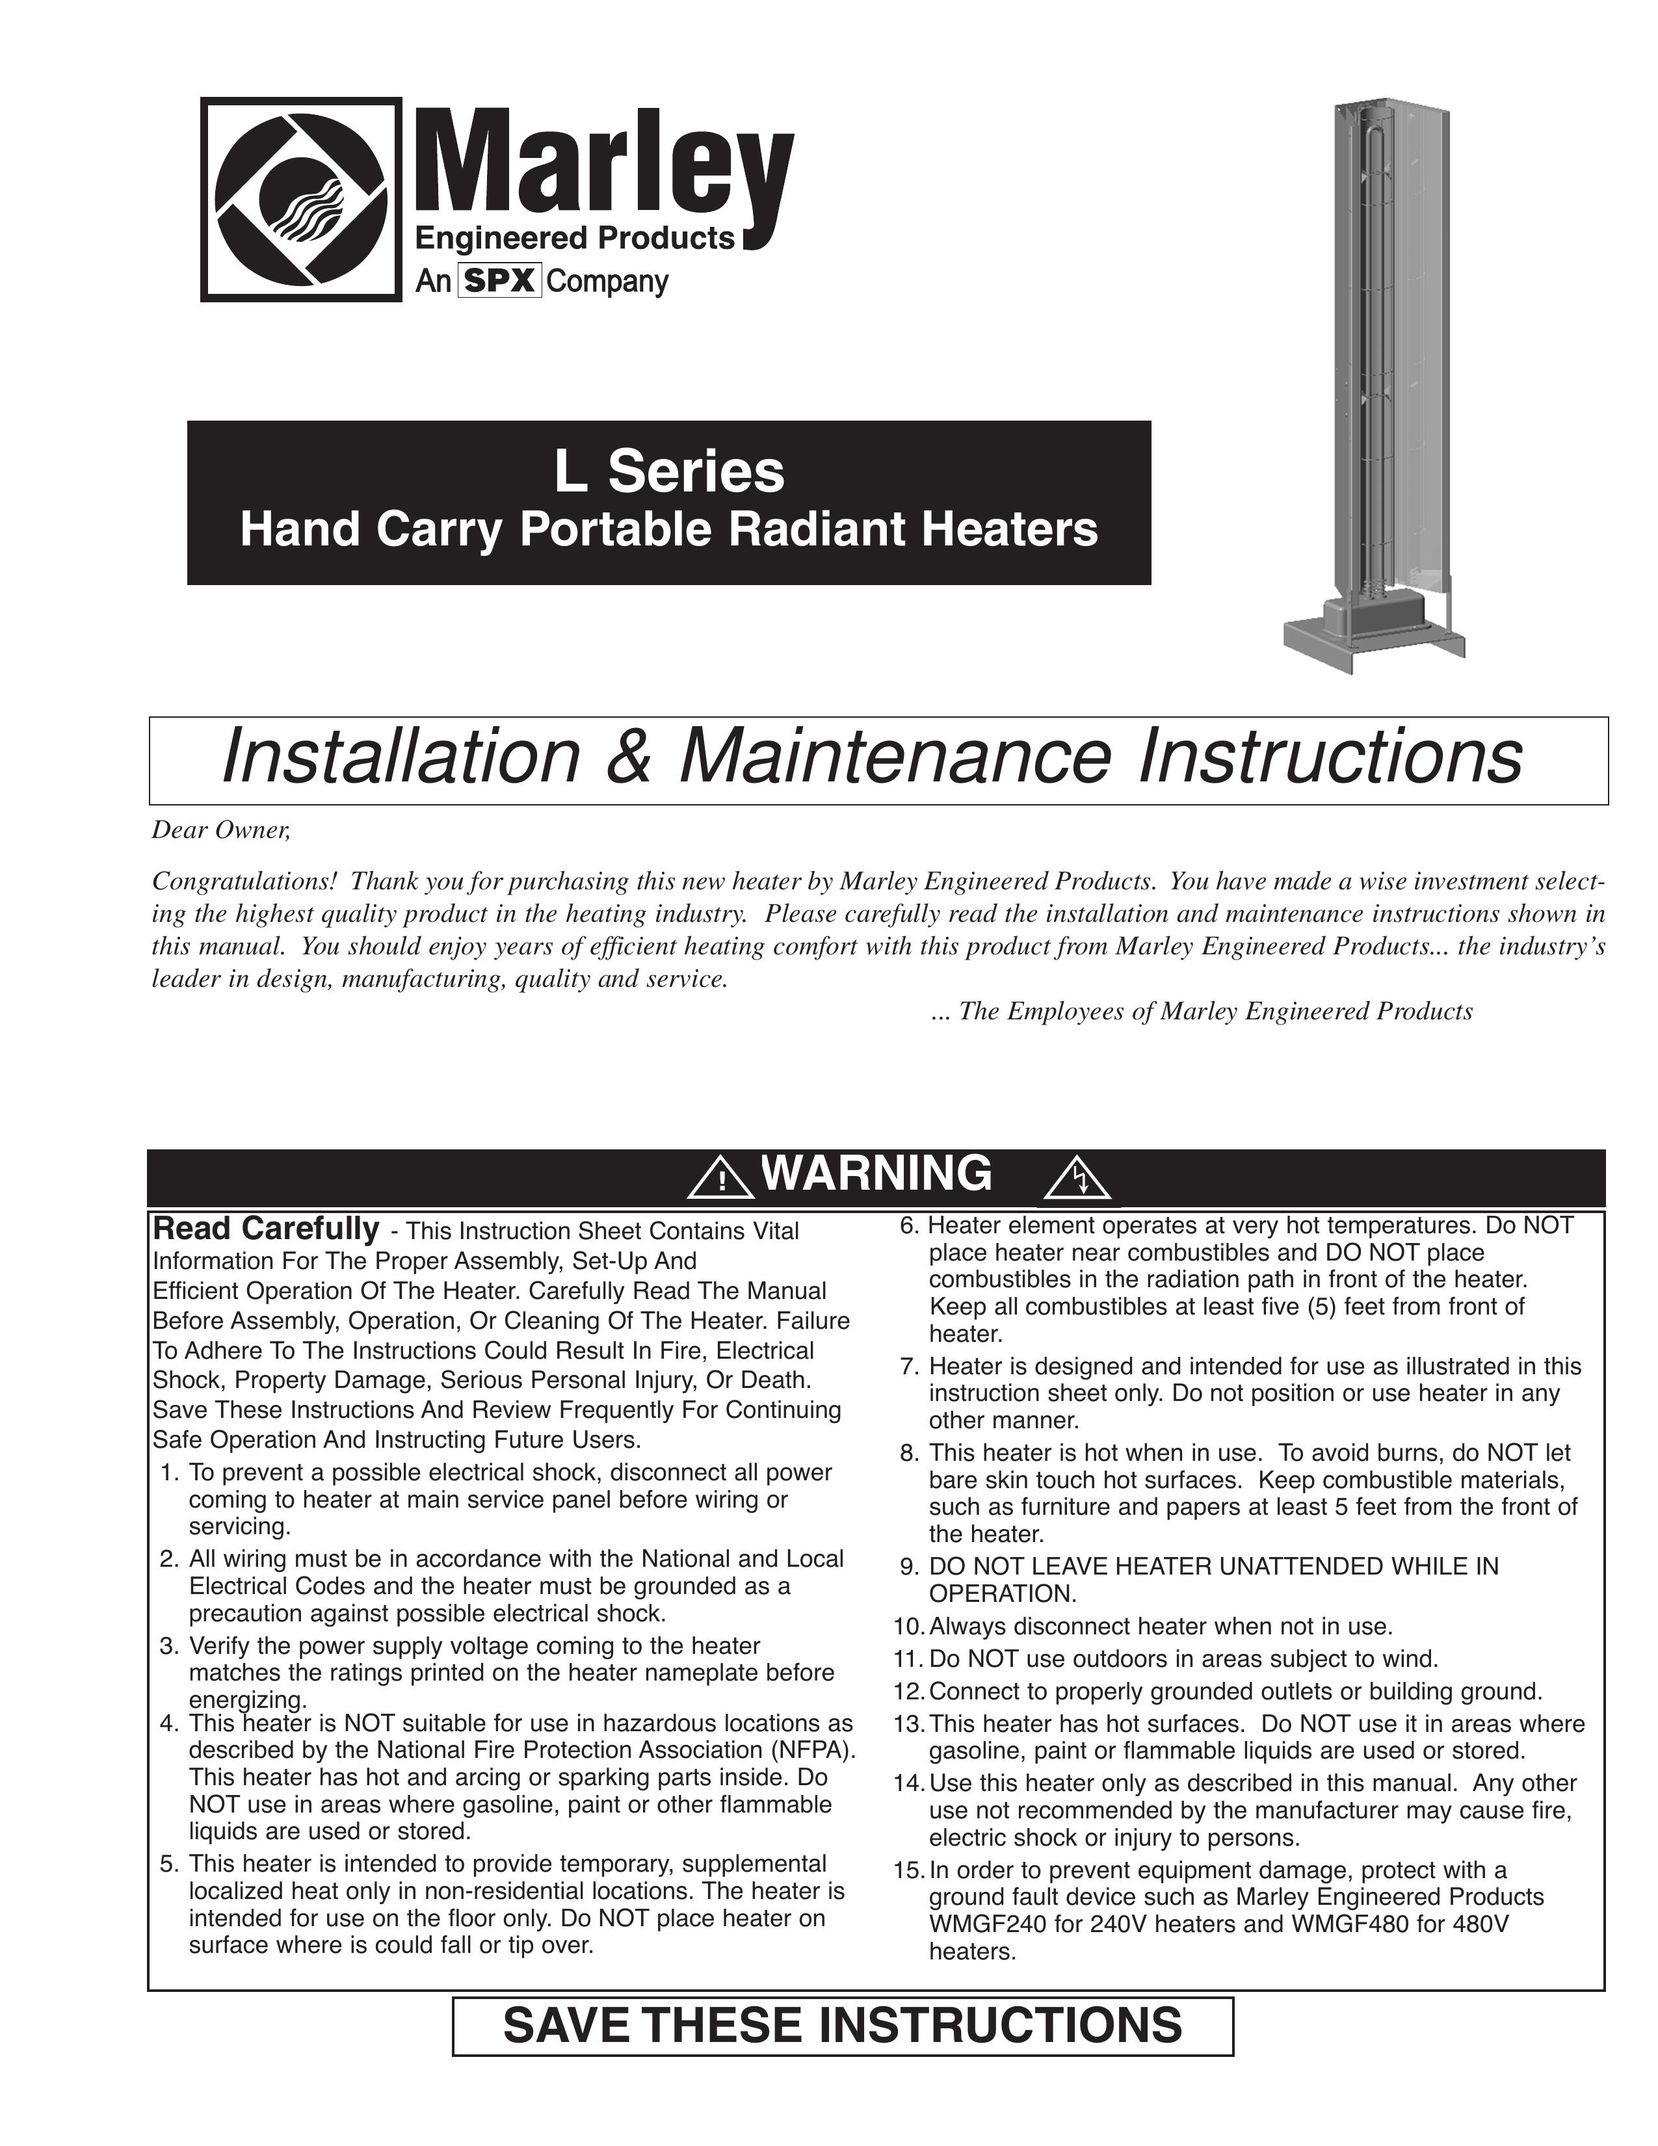 Marley Engineered Products WMGF240 Electric Heater User Manual